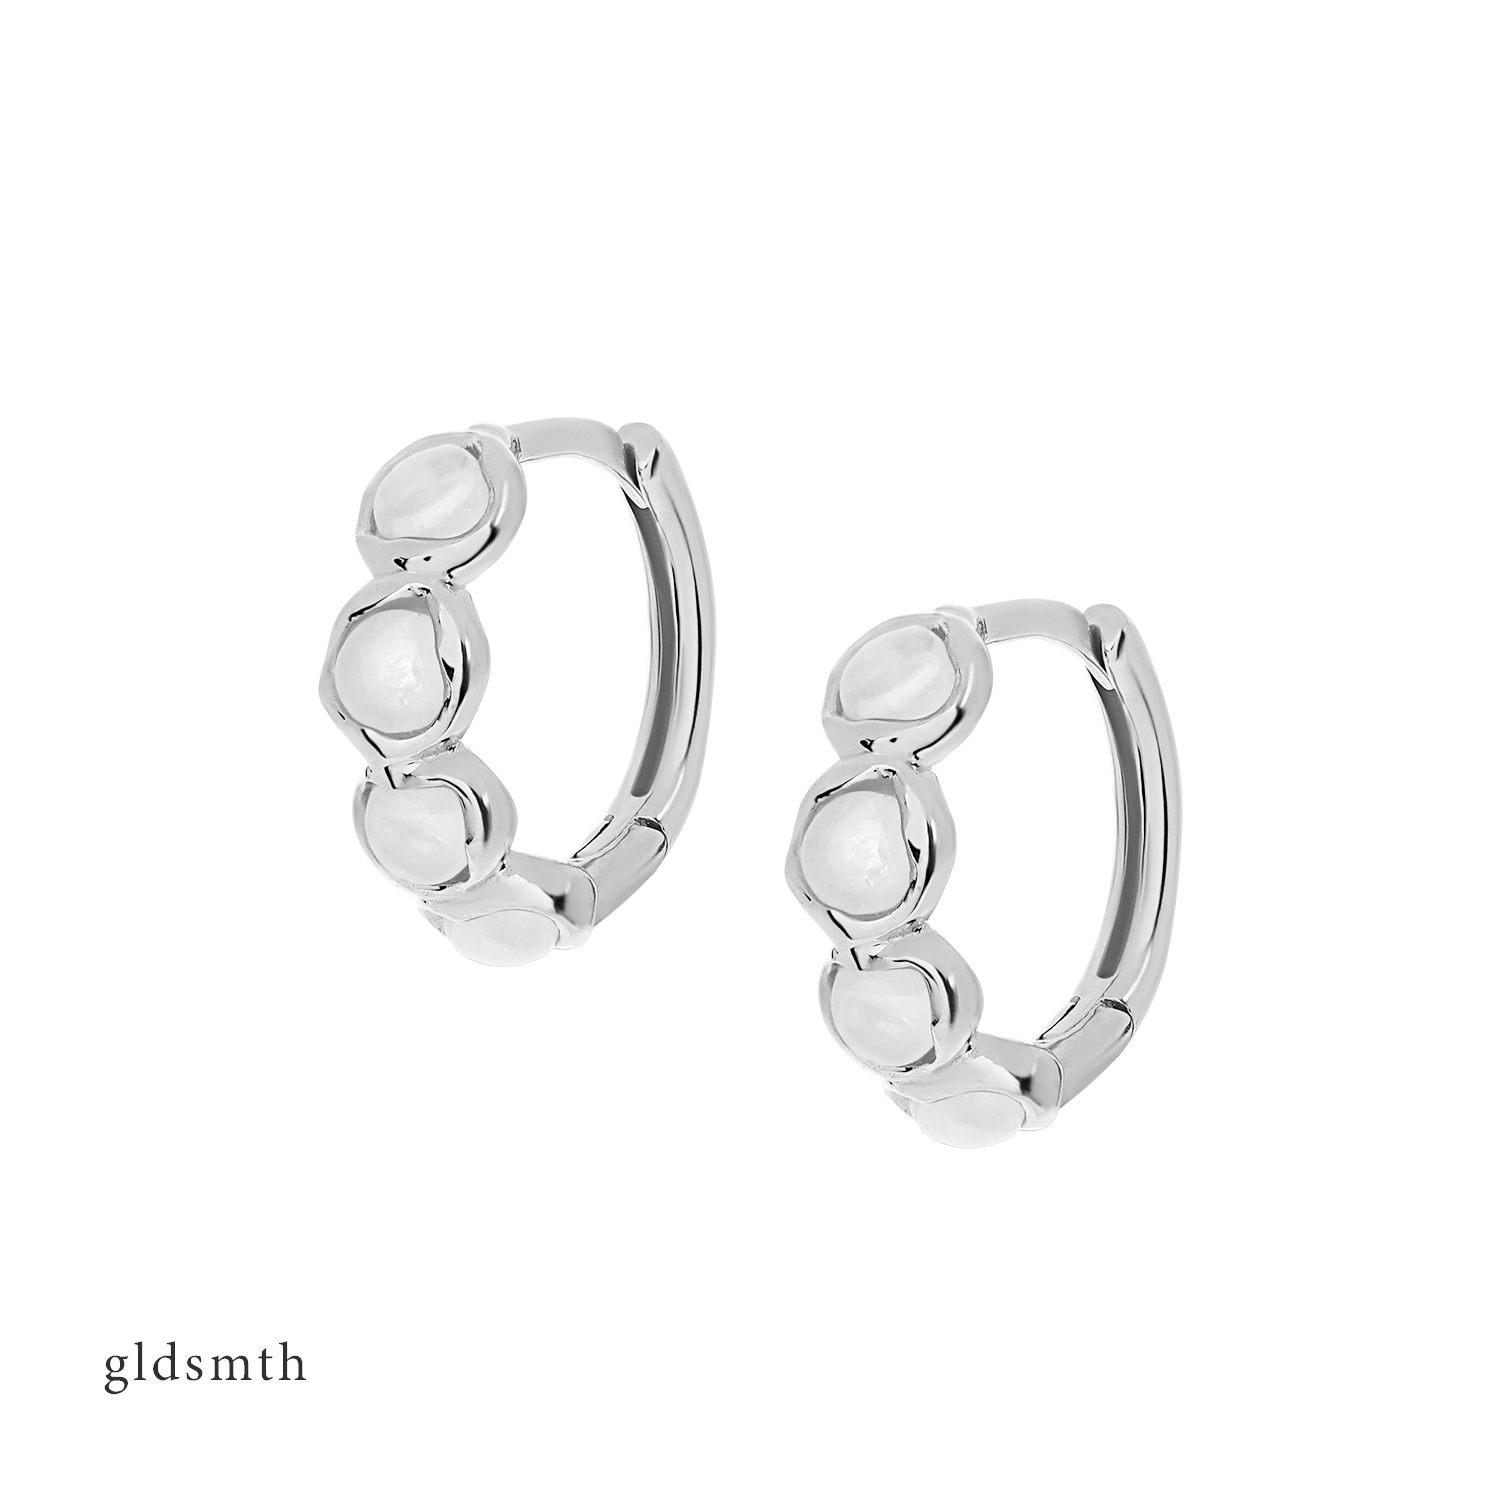 Elegant and fine earrings. Handcrafted solid white gold huggies set with moonstones.